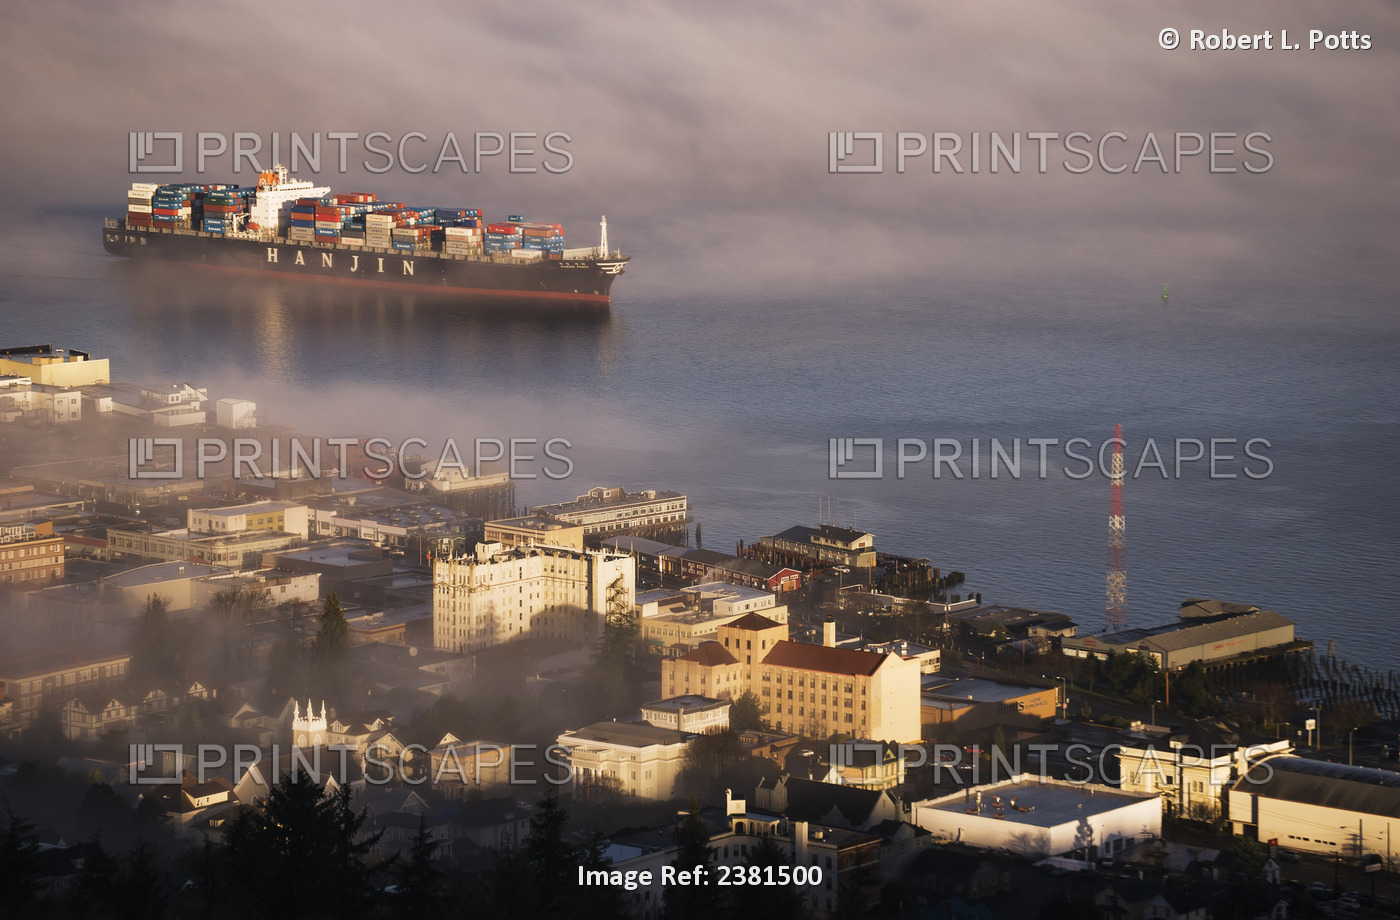 A Container Ship Emerges From The Fog; Astoria, Oregon, United States Of America